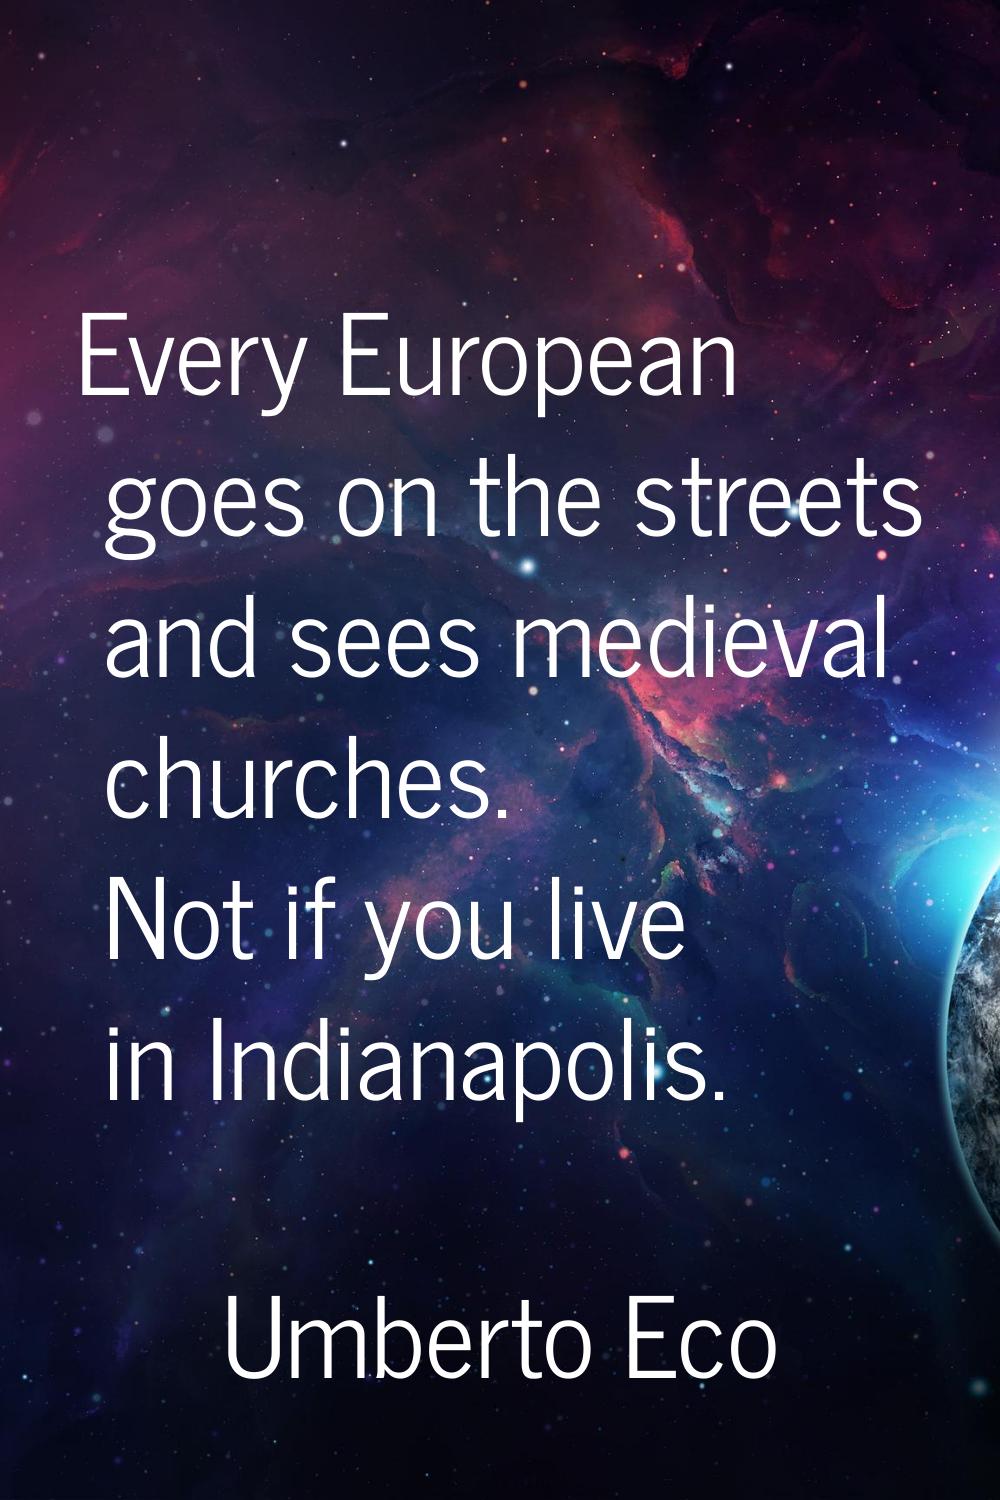 Every European goes on the streets and sees medieval churches. Not if you live in Indianapolis.